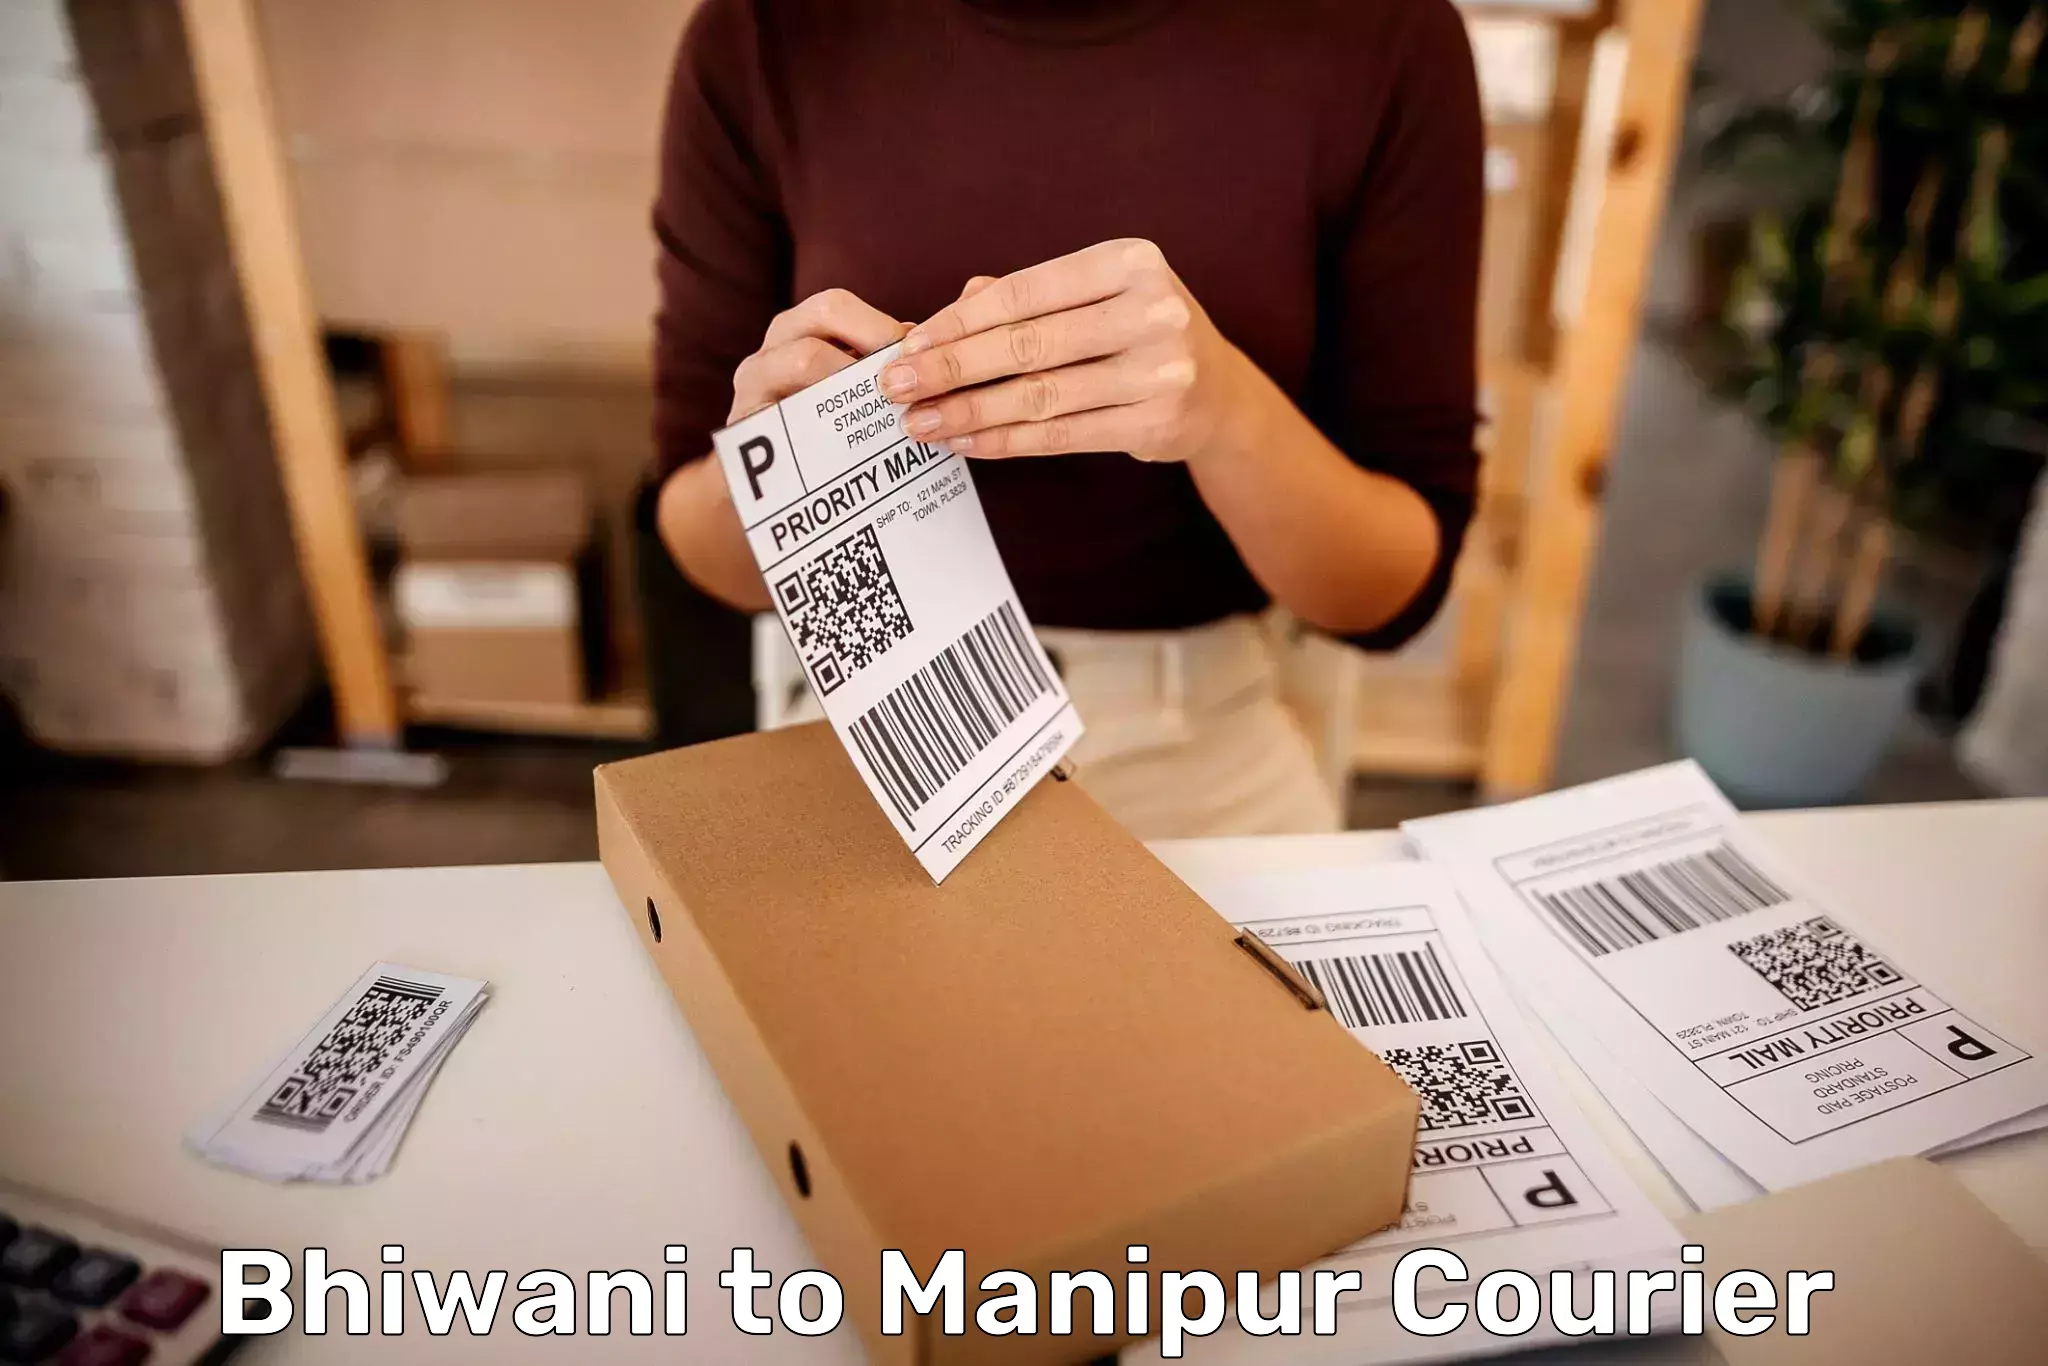 Luggage transport consultancy Bhiwani to Manipur